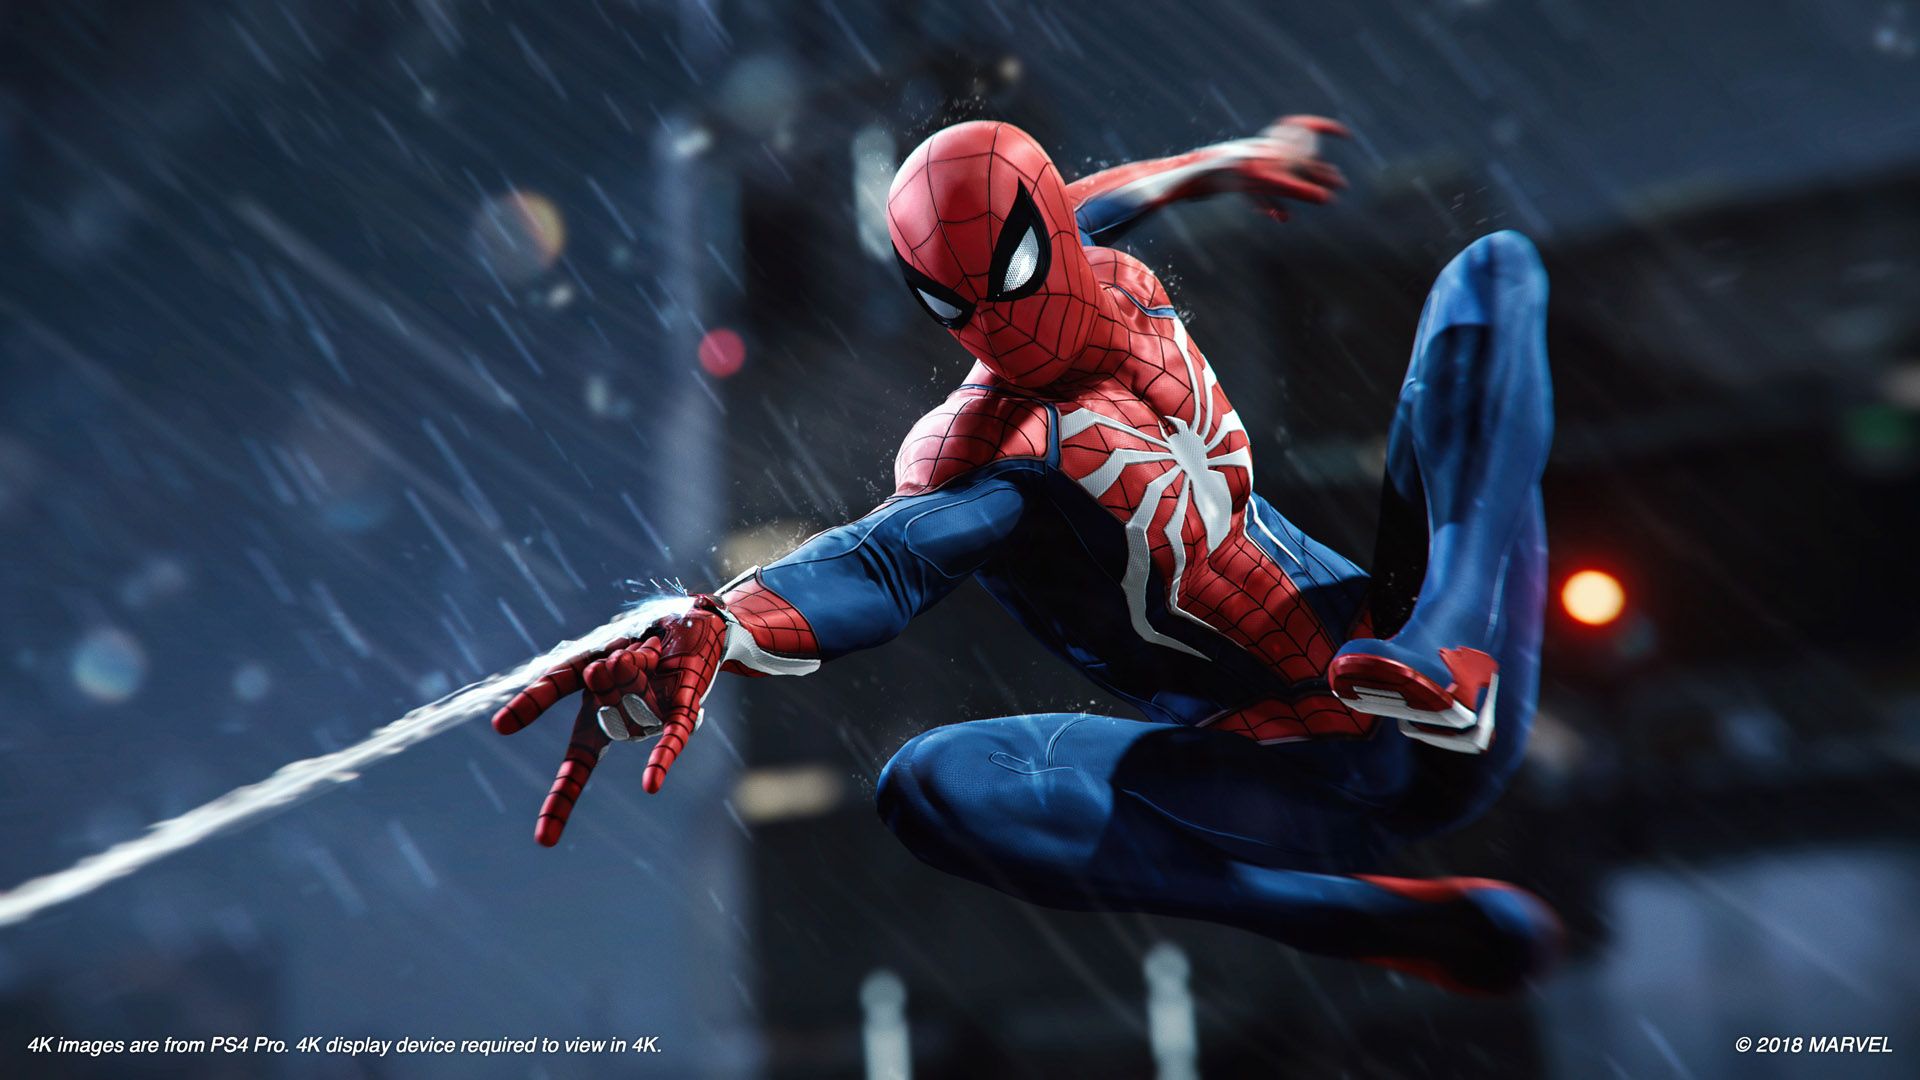 SpiderMan Gets Absolutely Rekt In Latest PS4 Gameplay Trailer